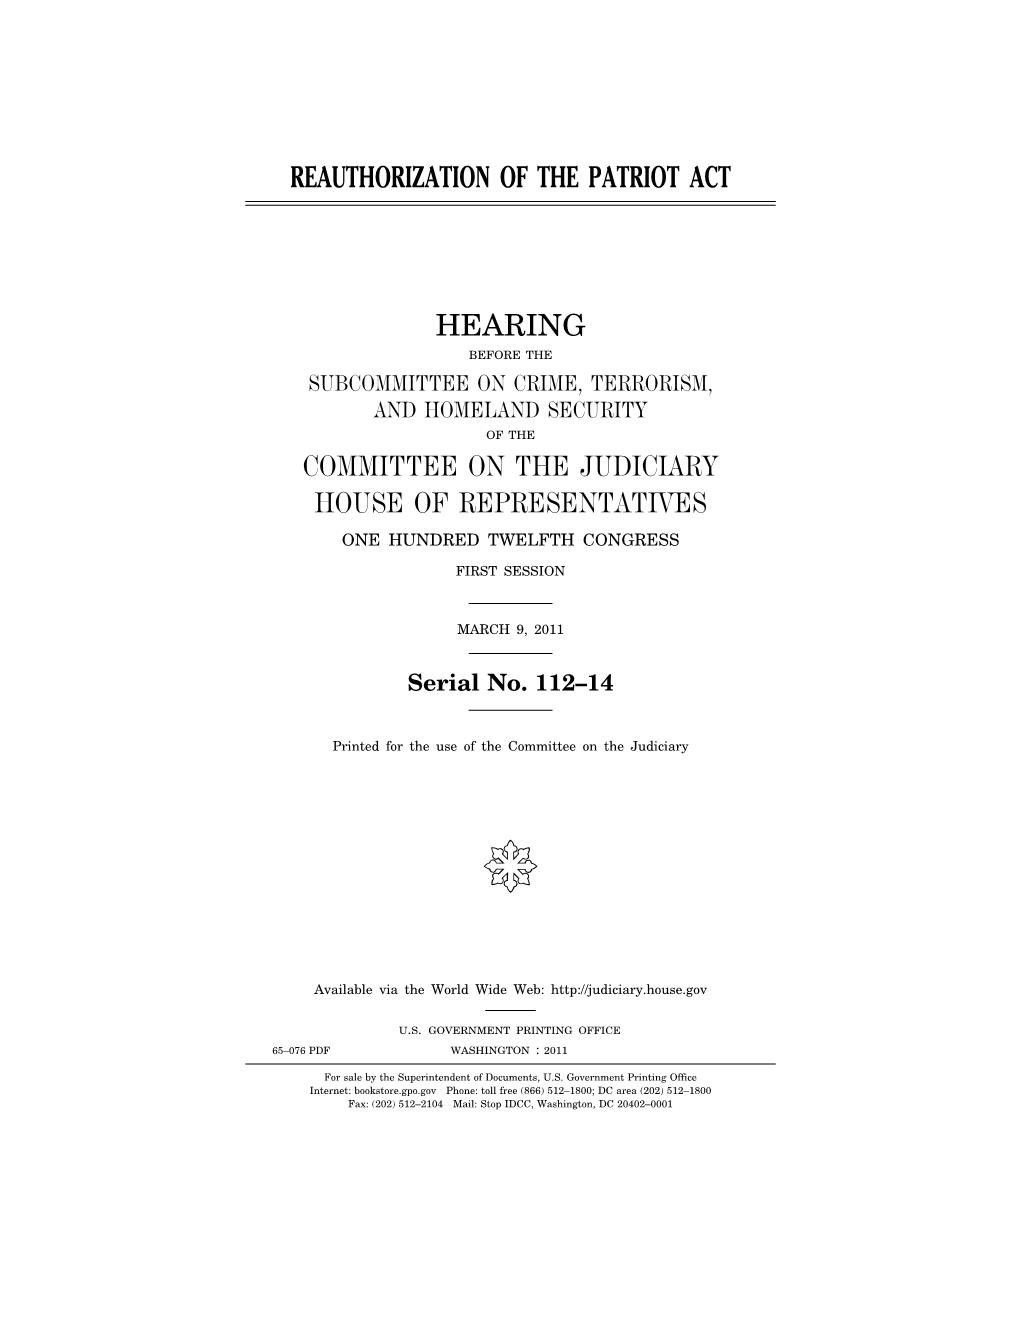 Reauthorization of the Patriot Act